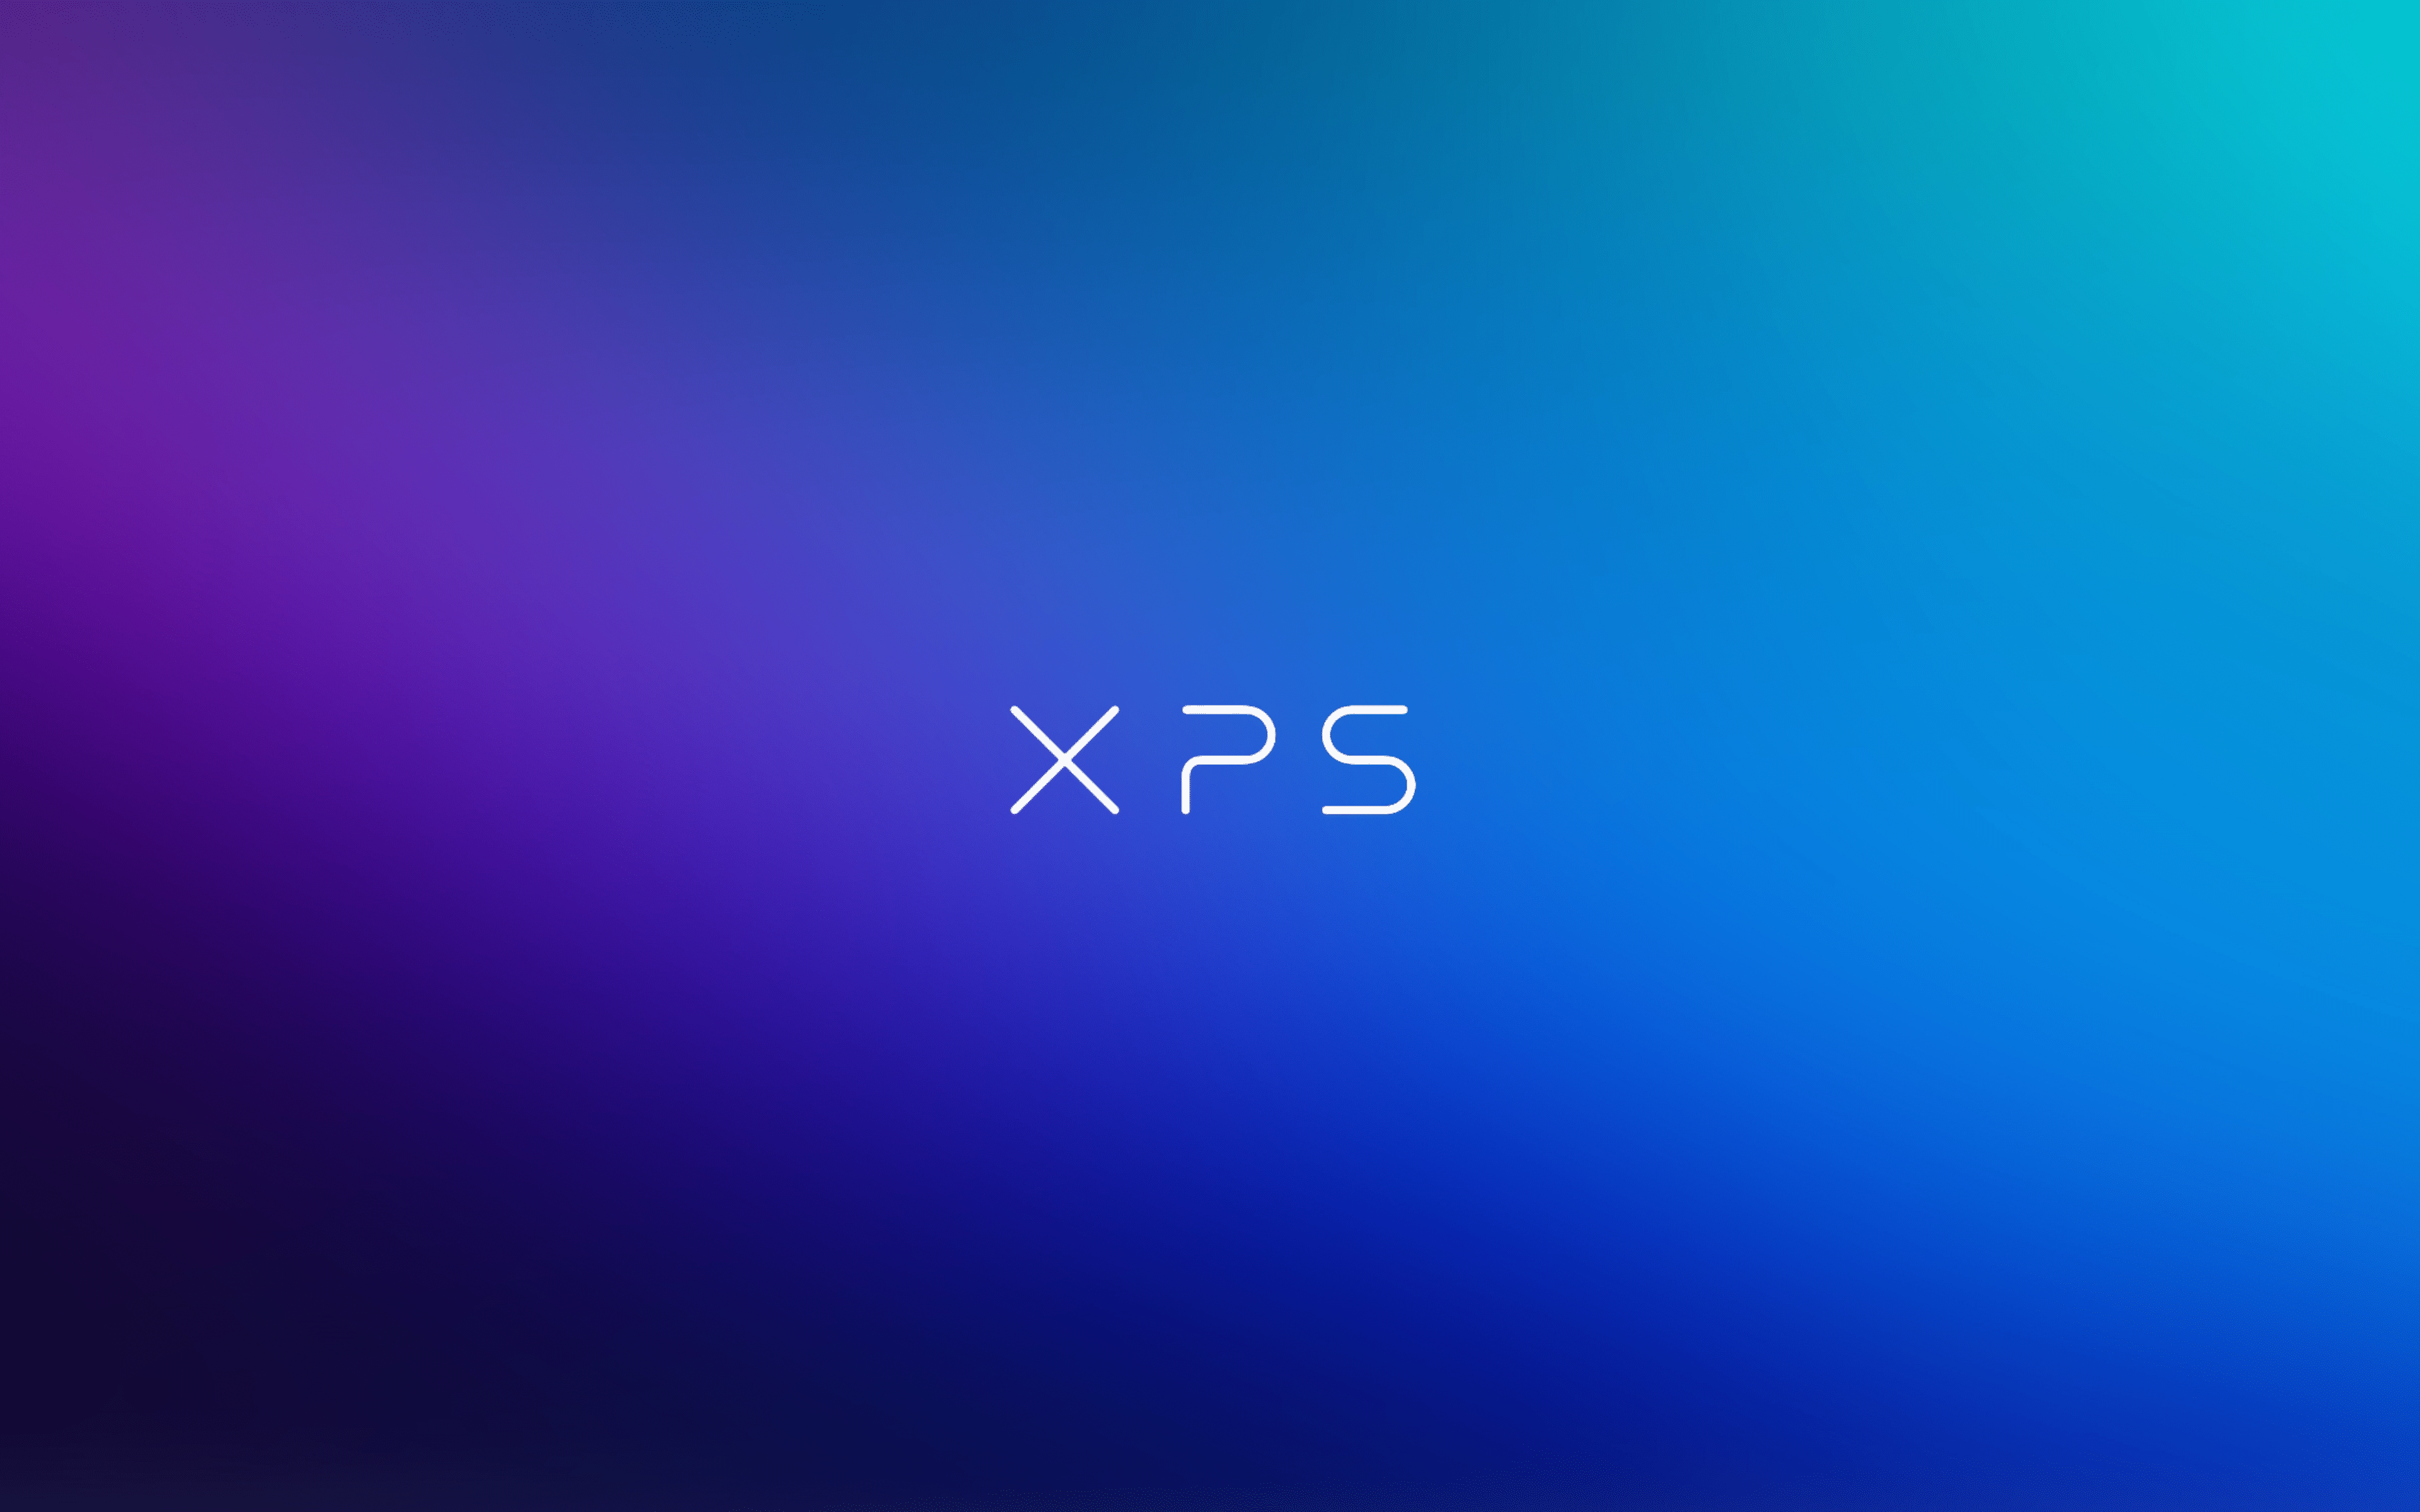 3840x2400 Tùy chỉnh] [3840 X 2400] Dell XPS Blue Purple Gradient Wallpaper cho 16:10 Aspect Ratio 2020 Dell XPS 13 (9300) or 2019 Dell XPS 13 2 In 1 (7390): Dell